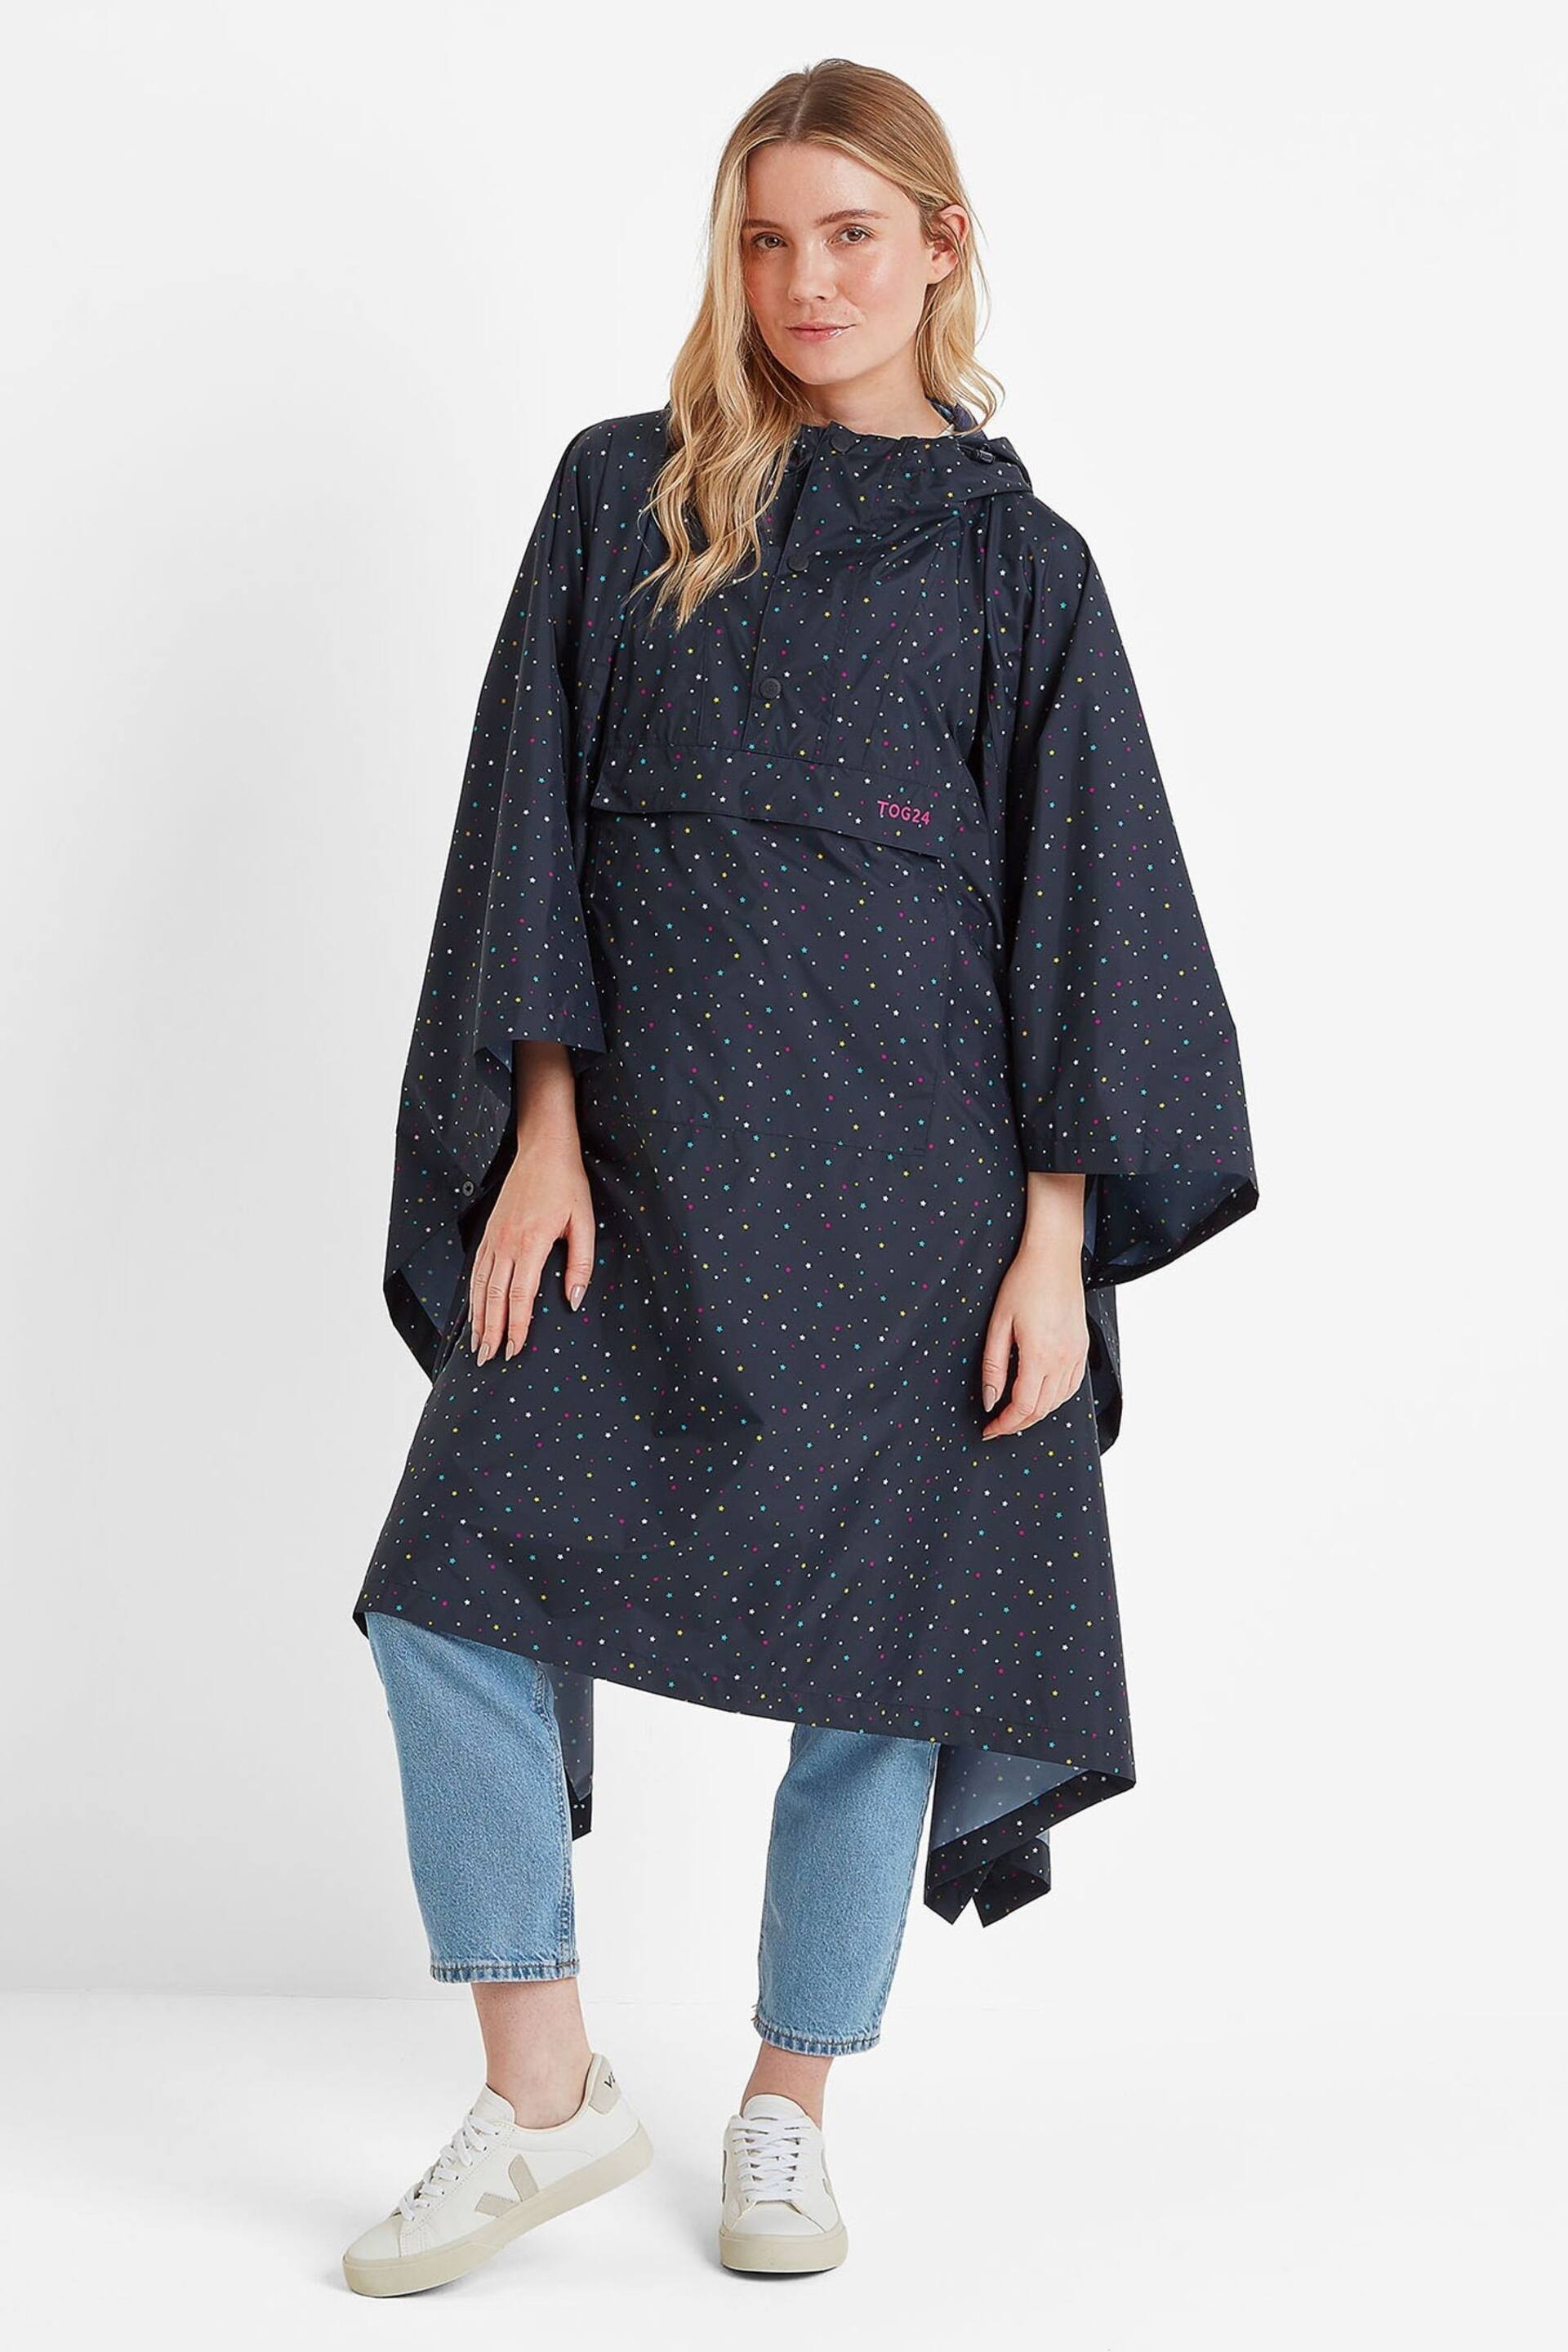 Tog 24 Blue Drench Star Poncho - Image 2 of 7